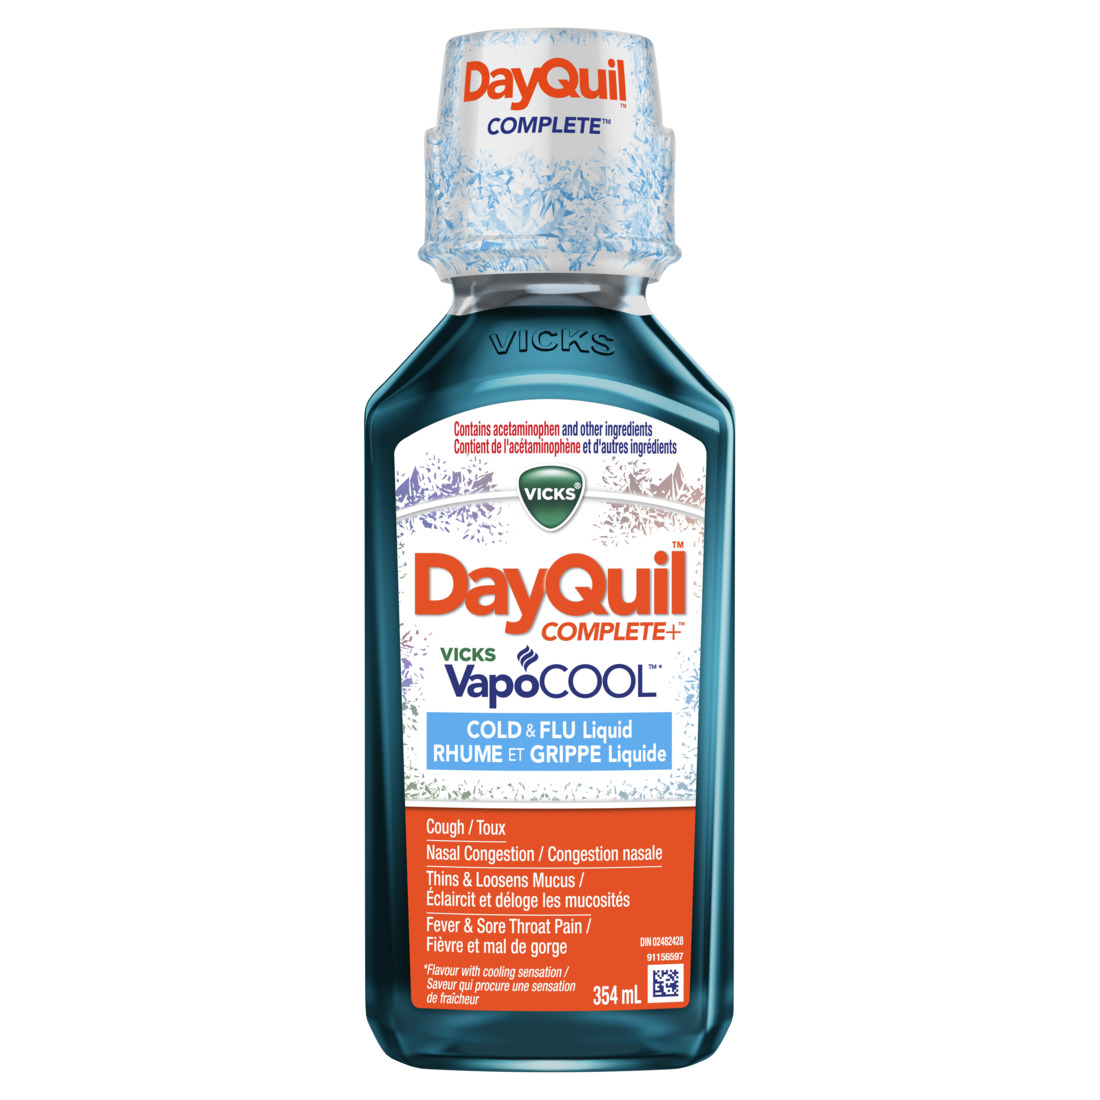 dayquil-complete-vicks-vapocool-tm-daytime-cough-cold-and-flu-relief-front